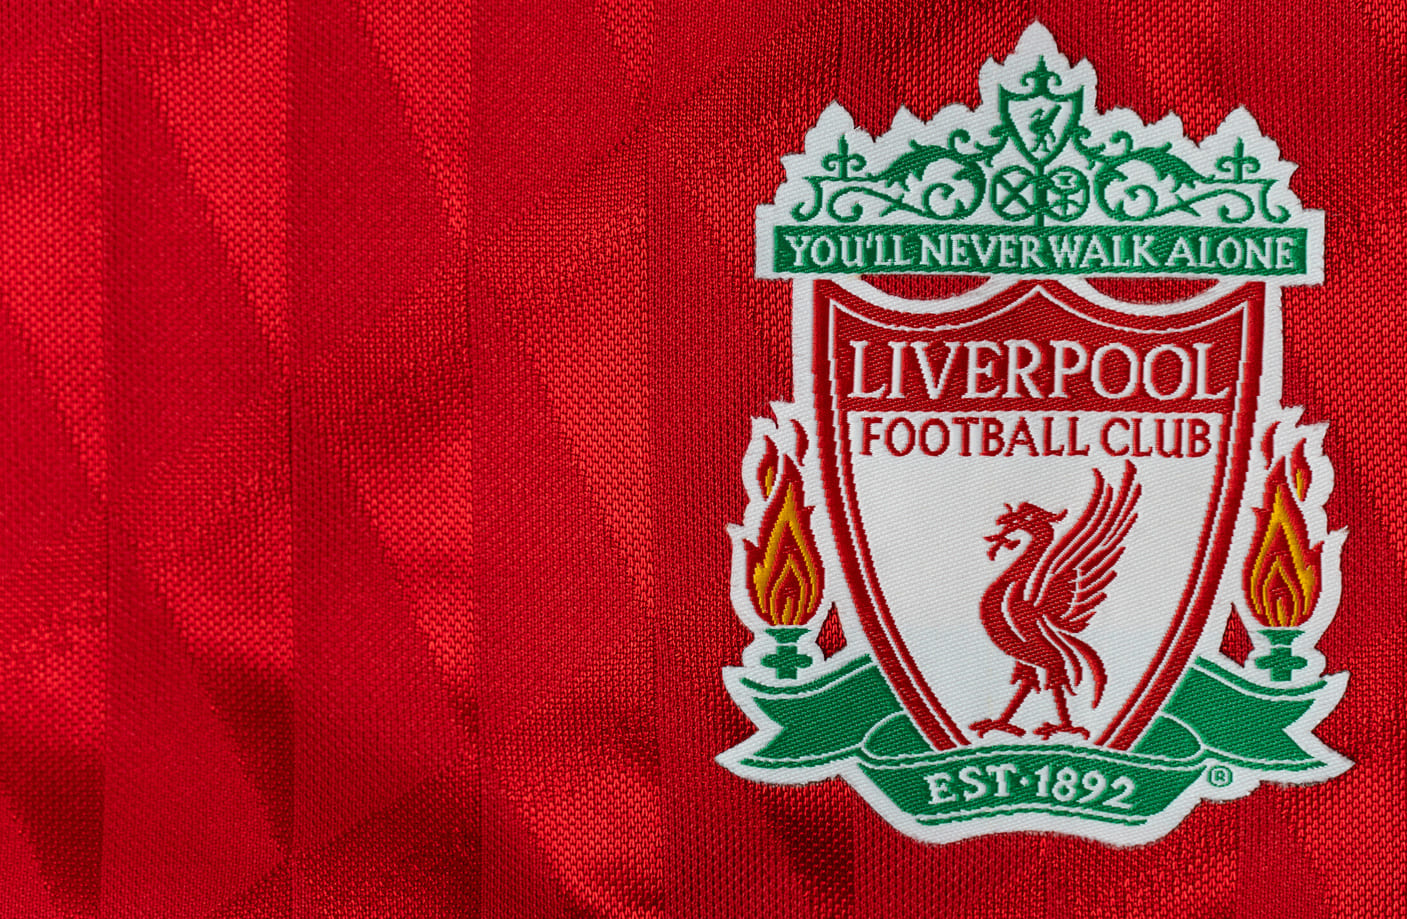 Liverpool Could Become the First Premier League Club With Crypto as Main Sponsor